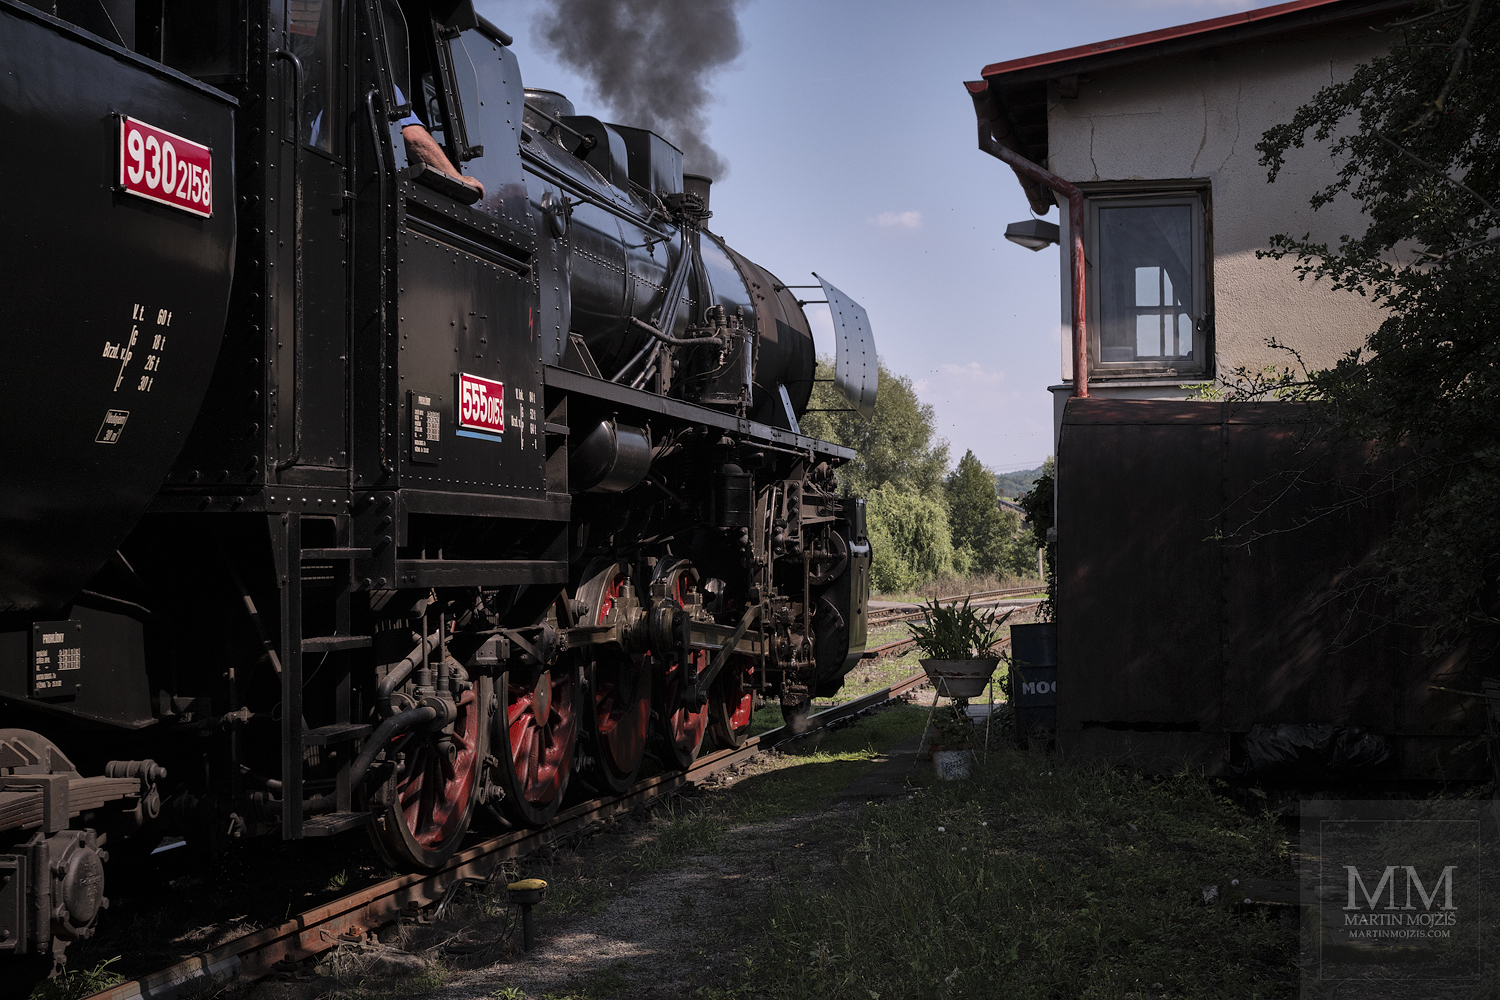 Fine Art  photograph of the steam locomotive by the signalling tower. Martin Mojzis.